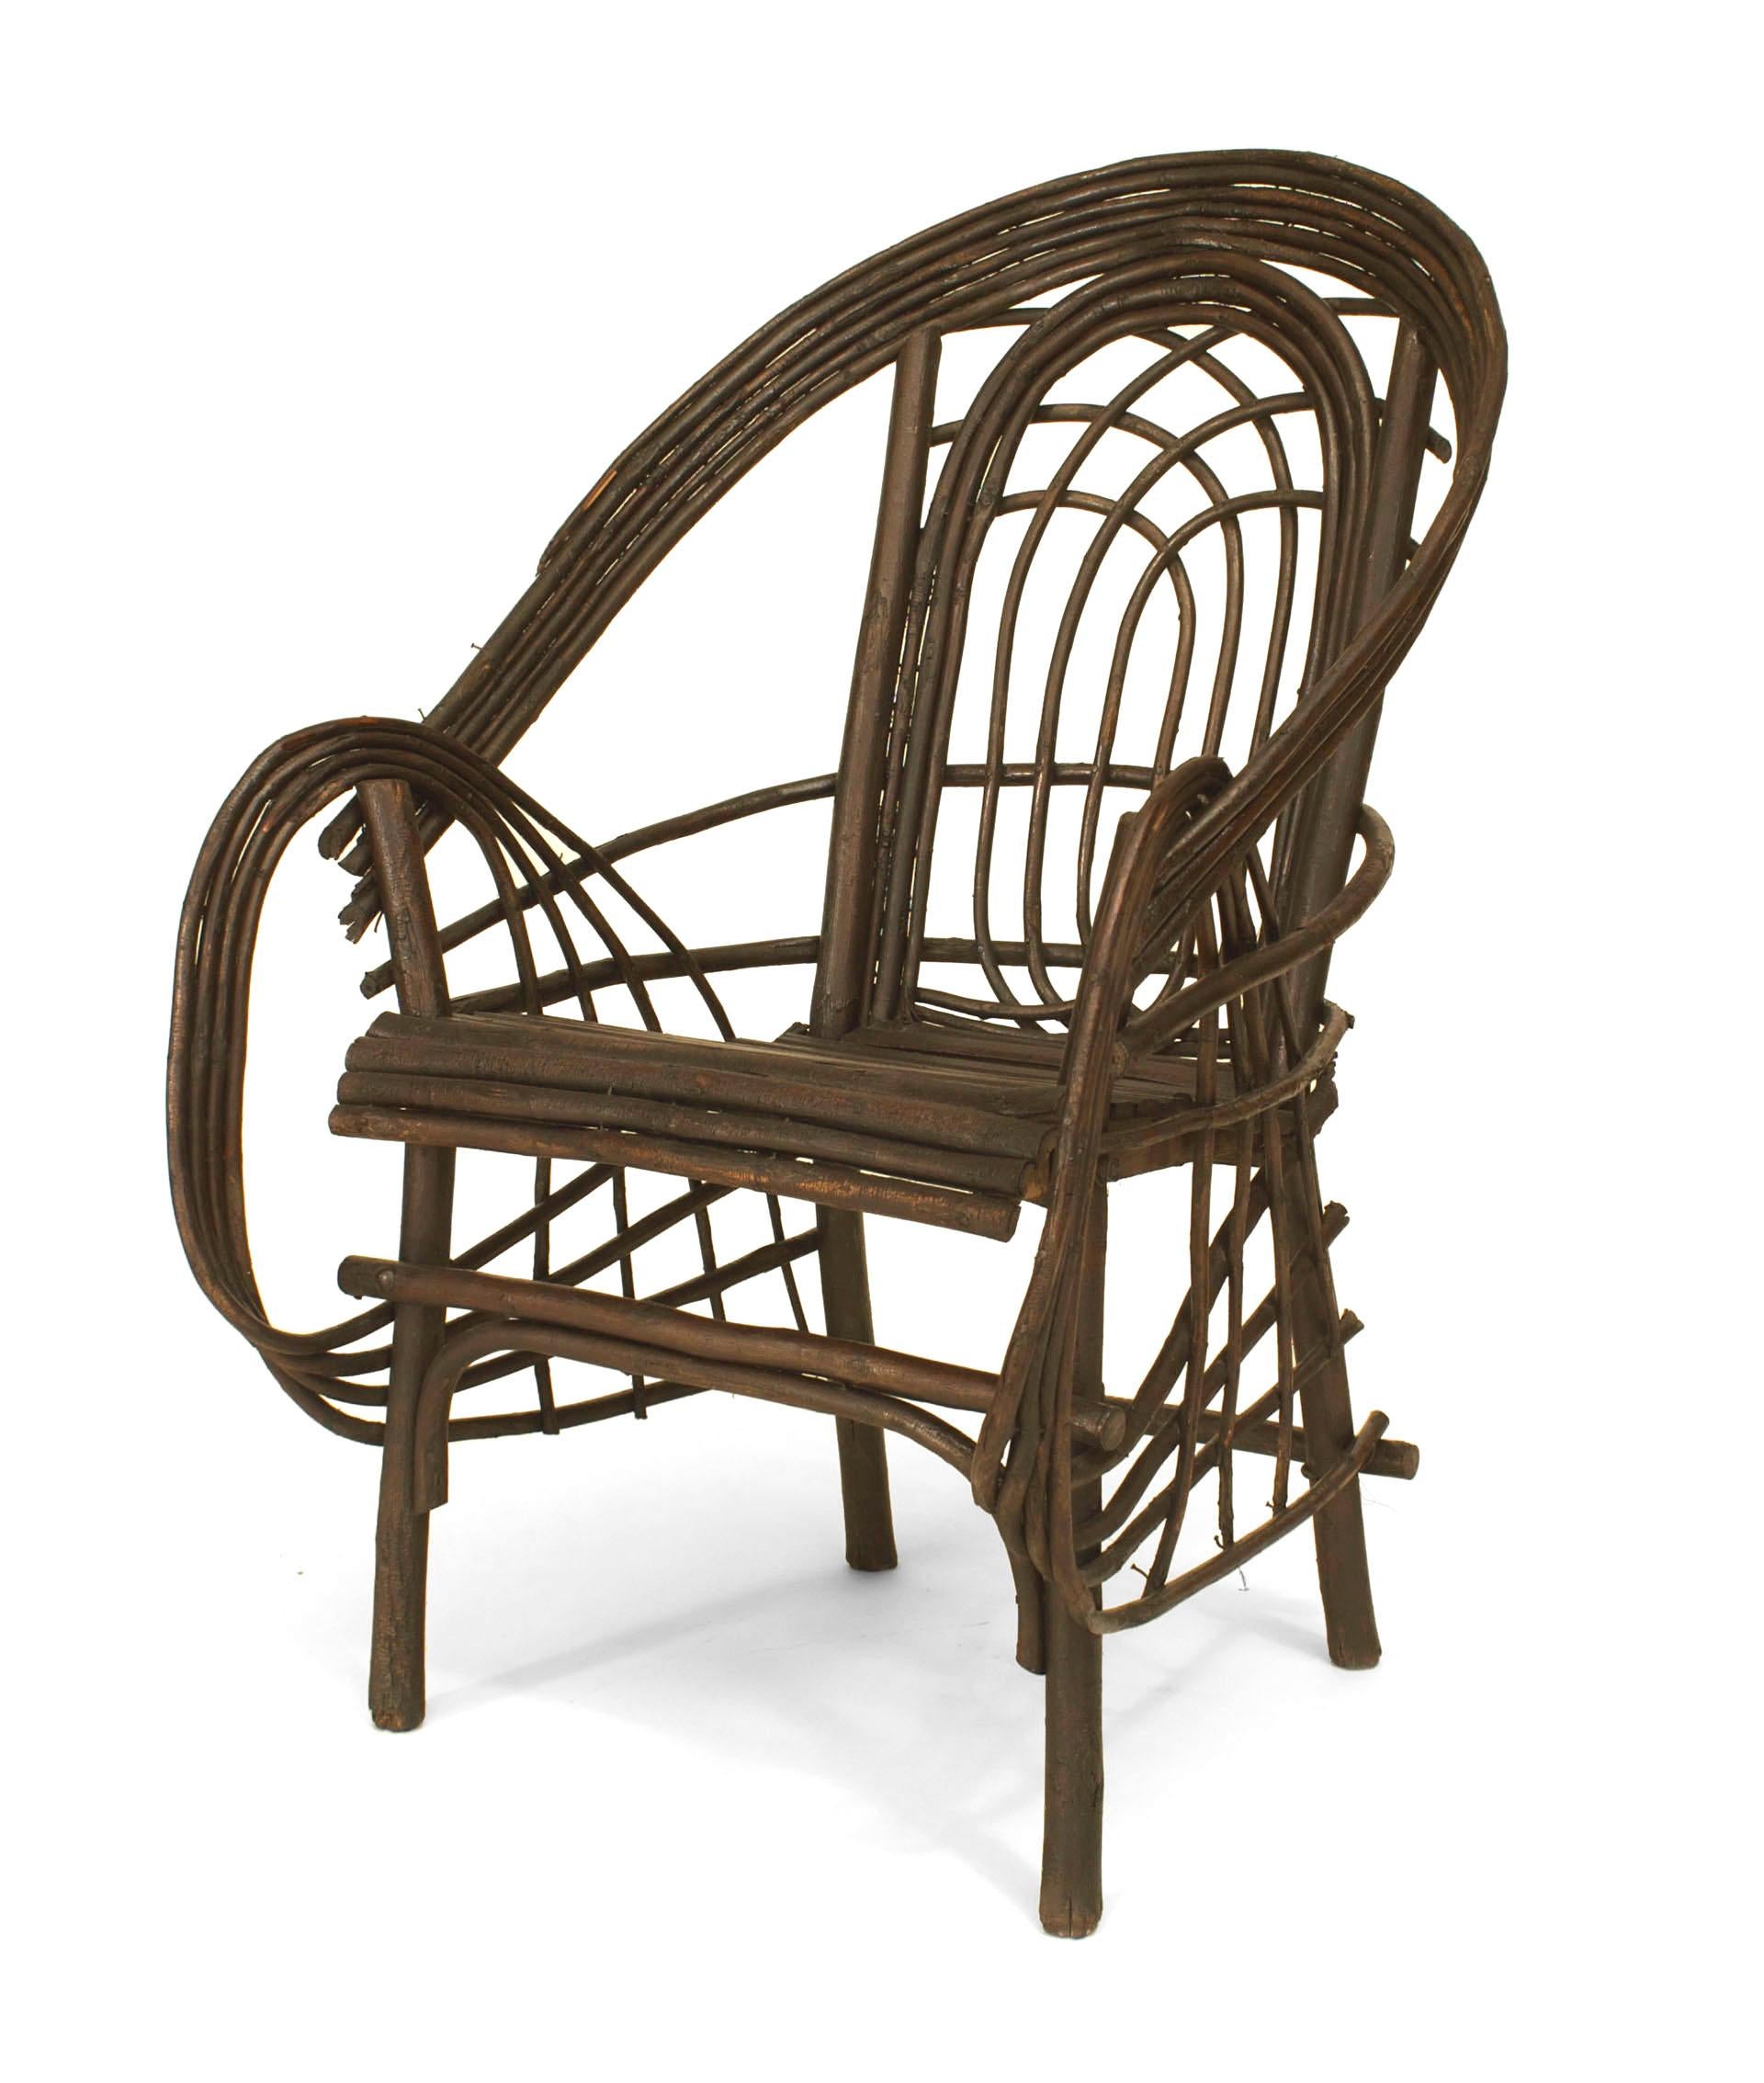 Rustic Adirondack (20th Cent) willow twig design arm chair with a barrel
shaped back and circle design on front of the arms and a slat seat.